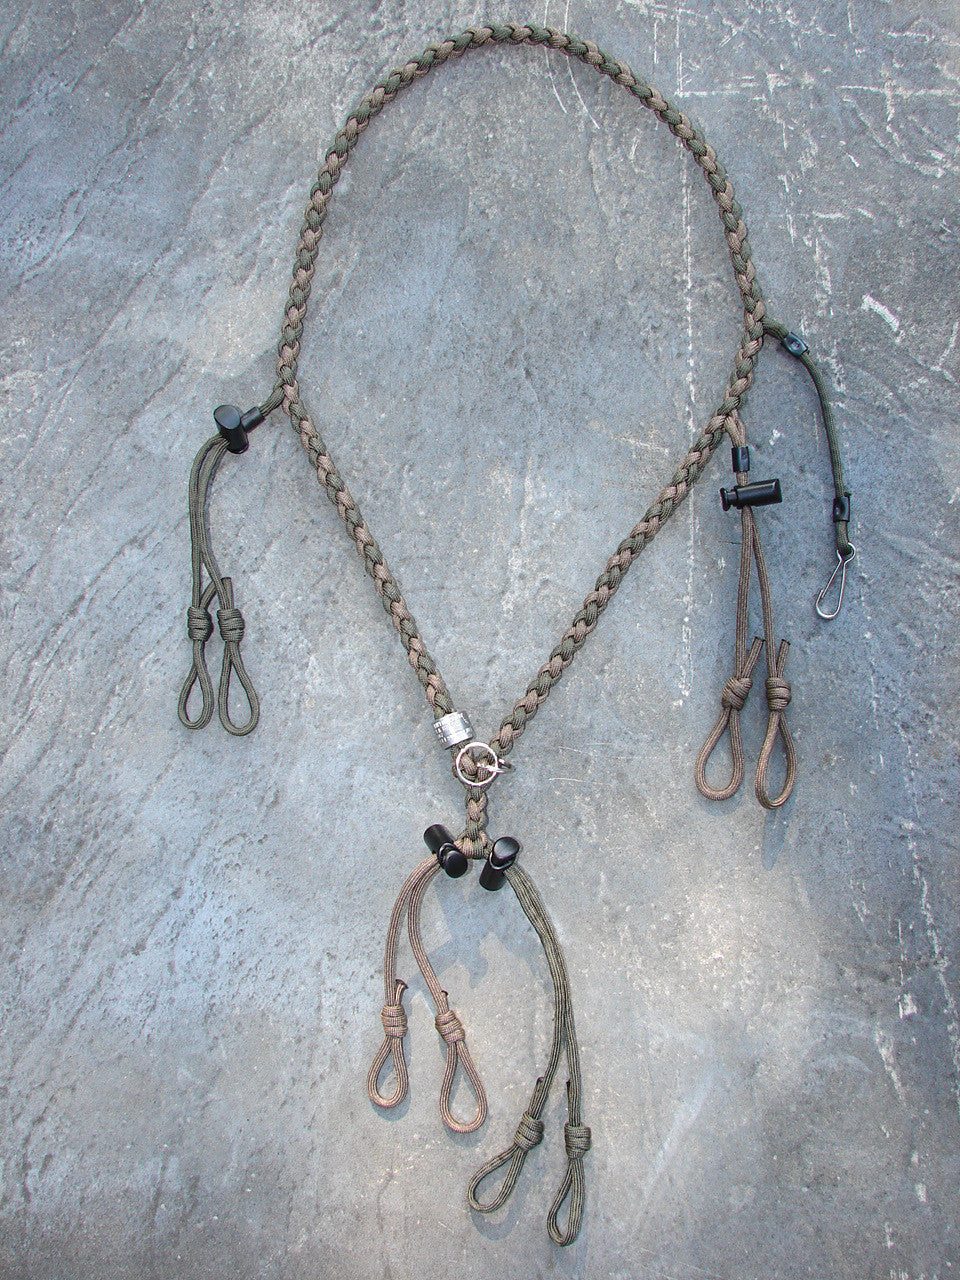 Paracord Lanyard for 4 calls and whistle - round braid